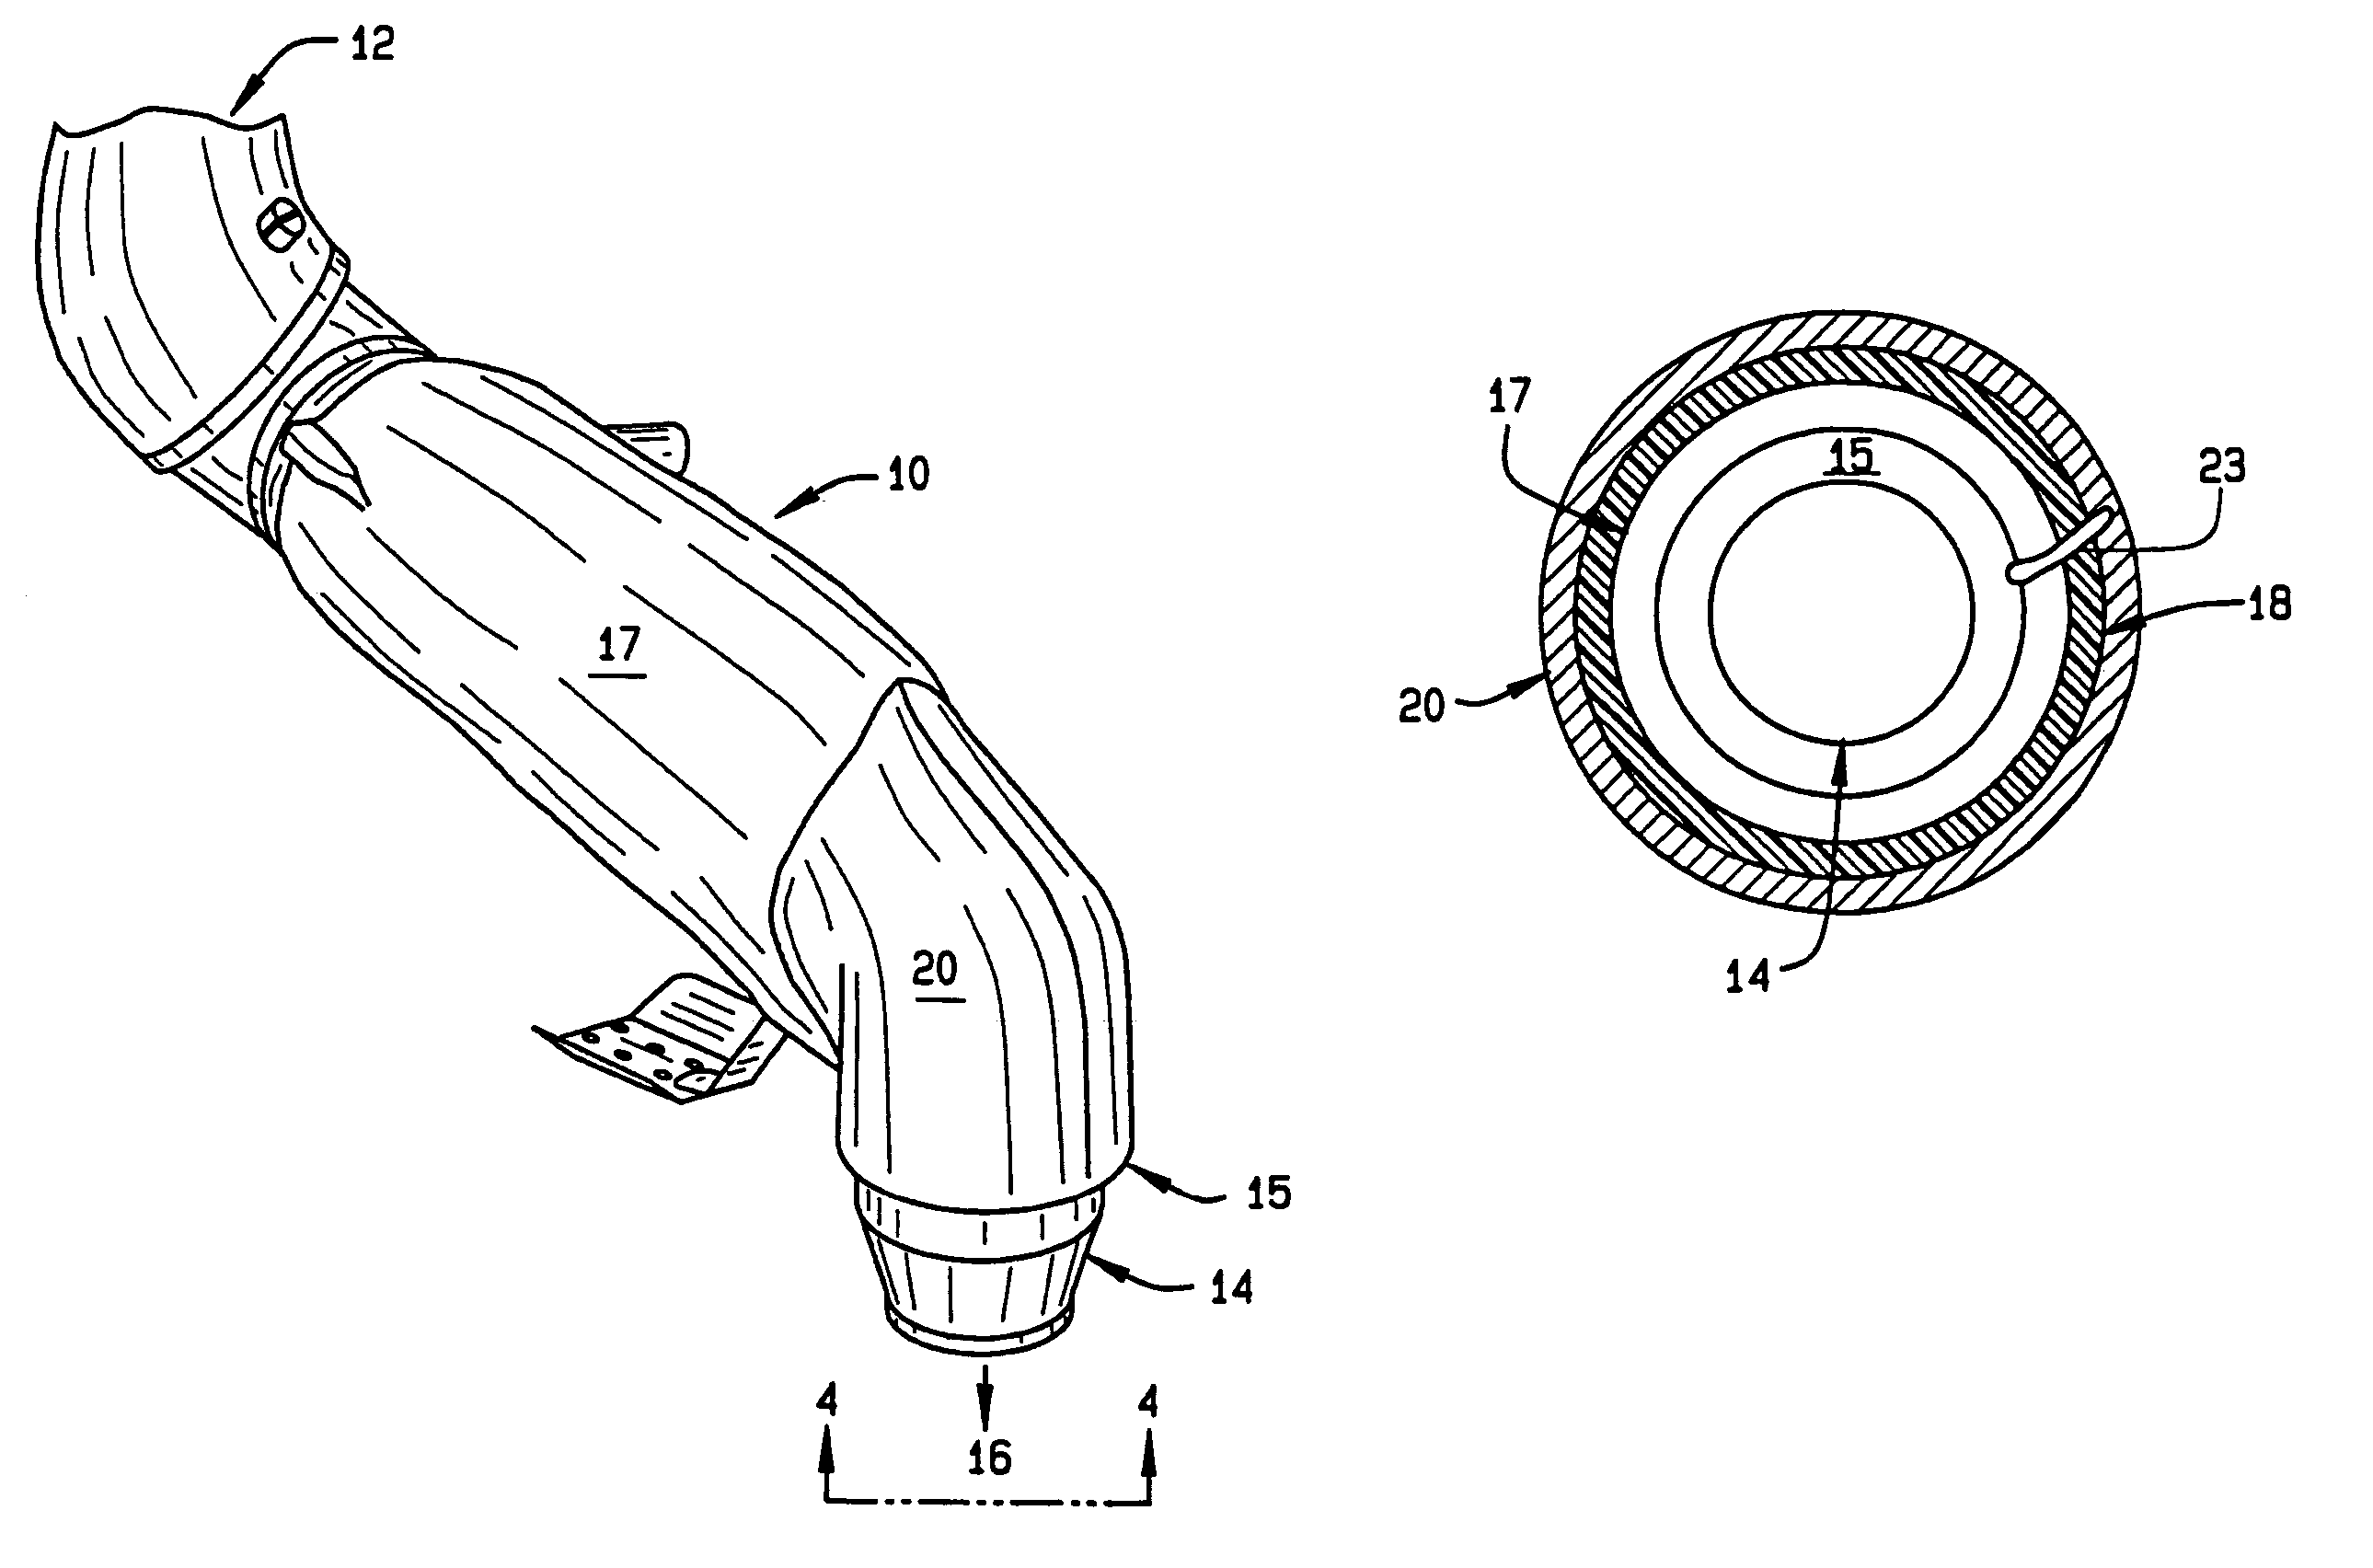 Method and apparatus for creating an enhanced electrical field to improve paint transfer efficiencies